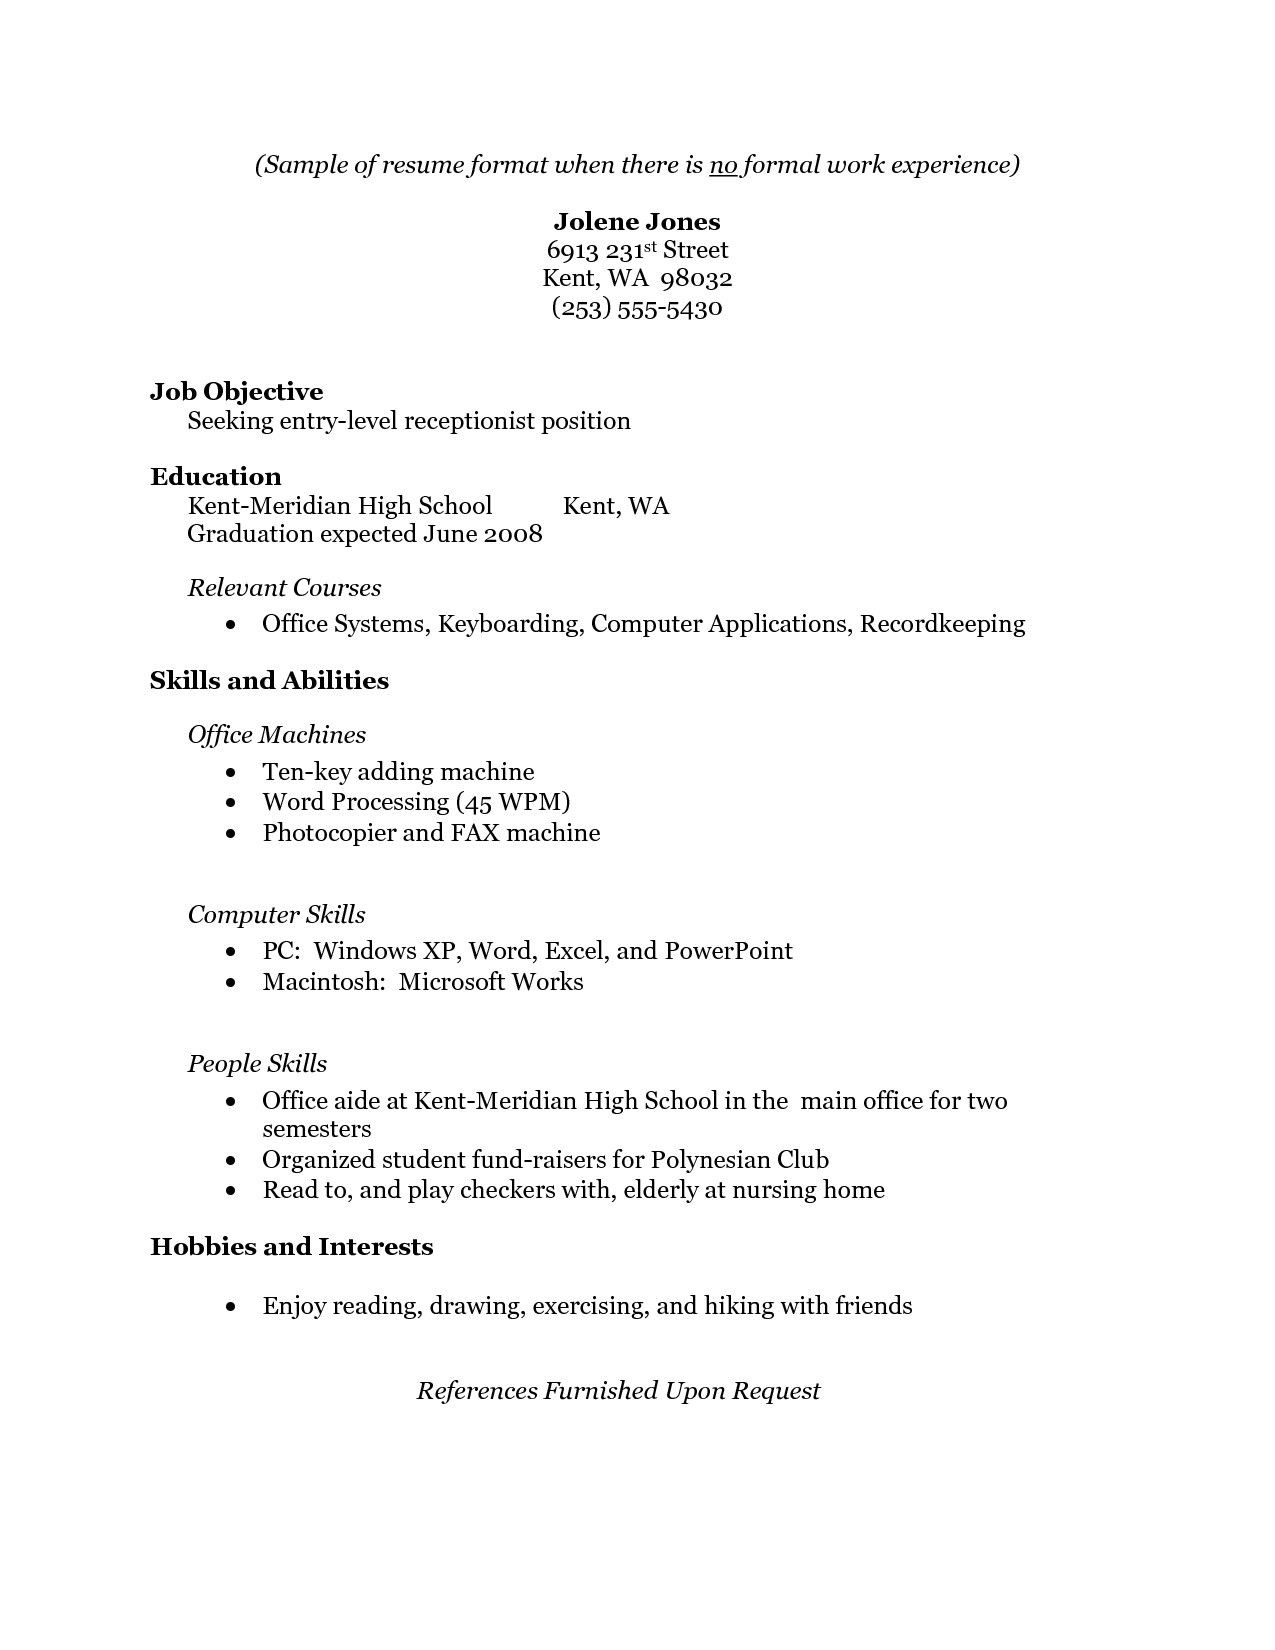 Resume Template for Highschool Graduate with No Work Experience Free Resume Templates No Work Experience #experience …